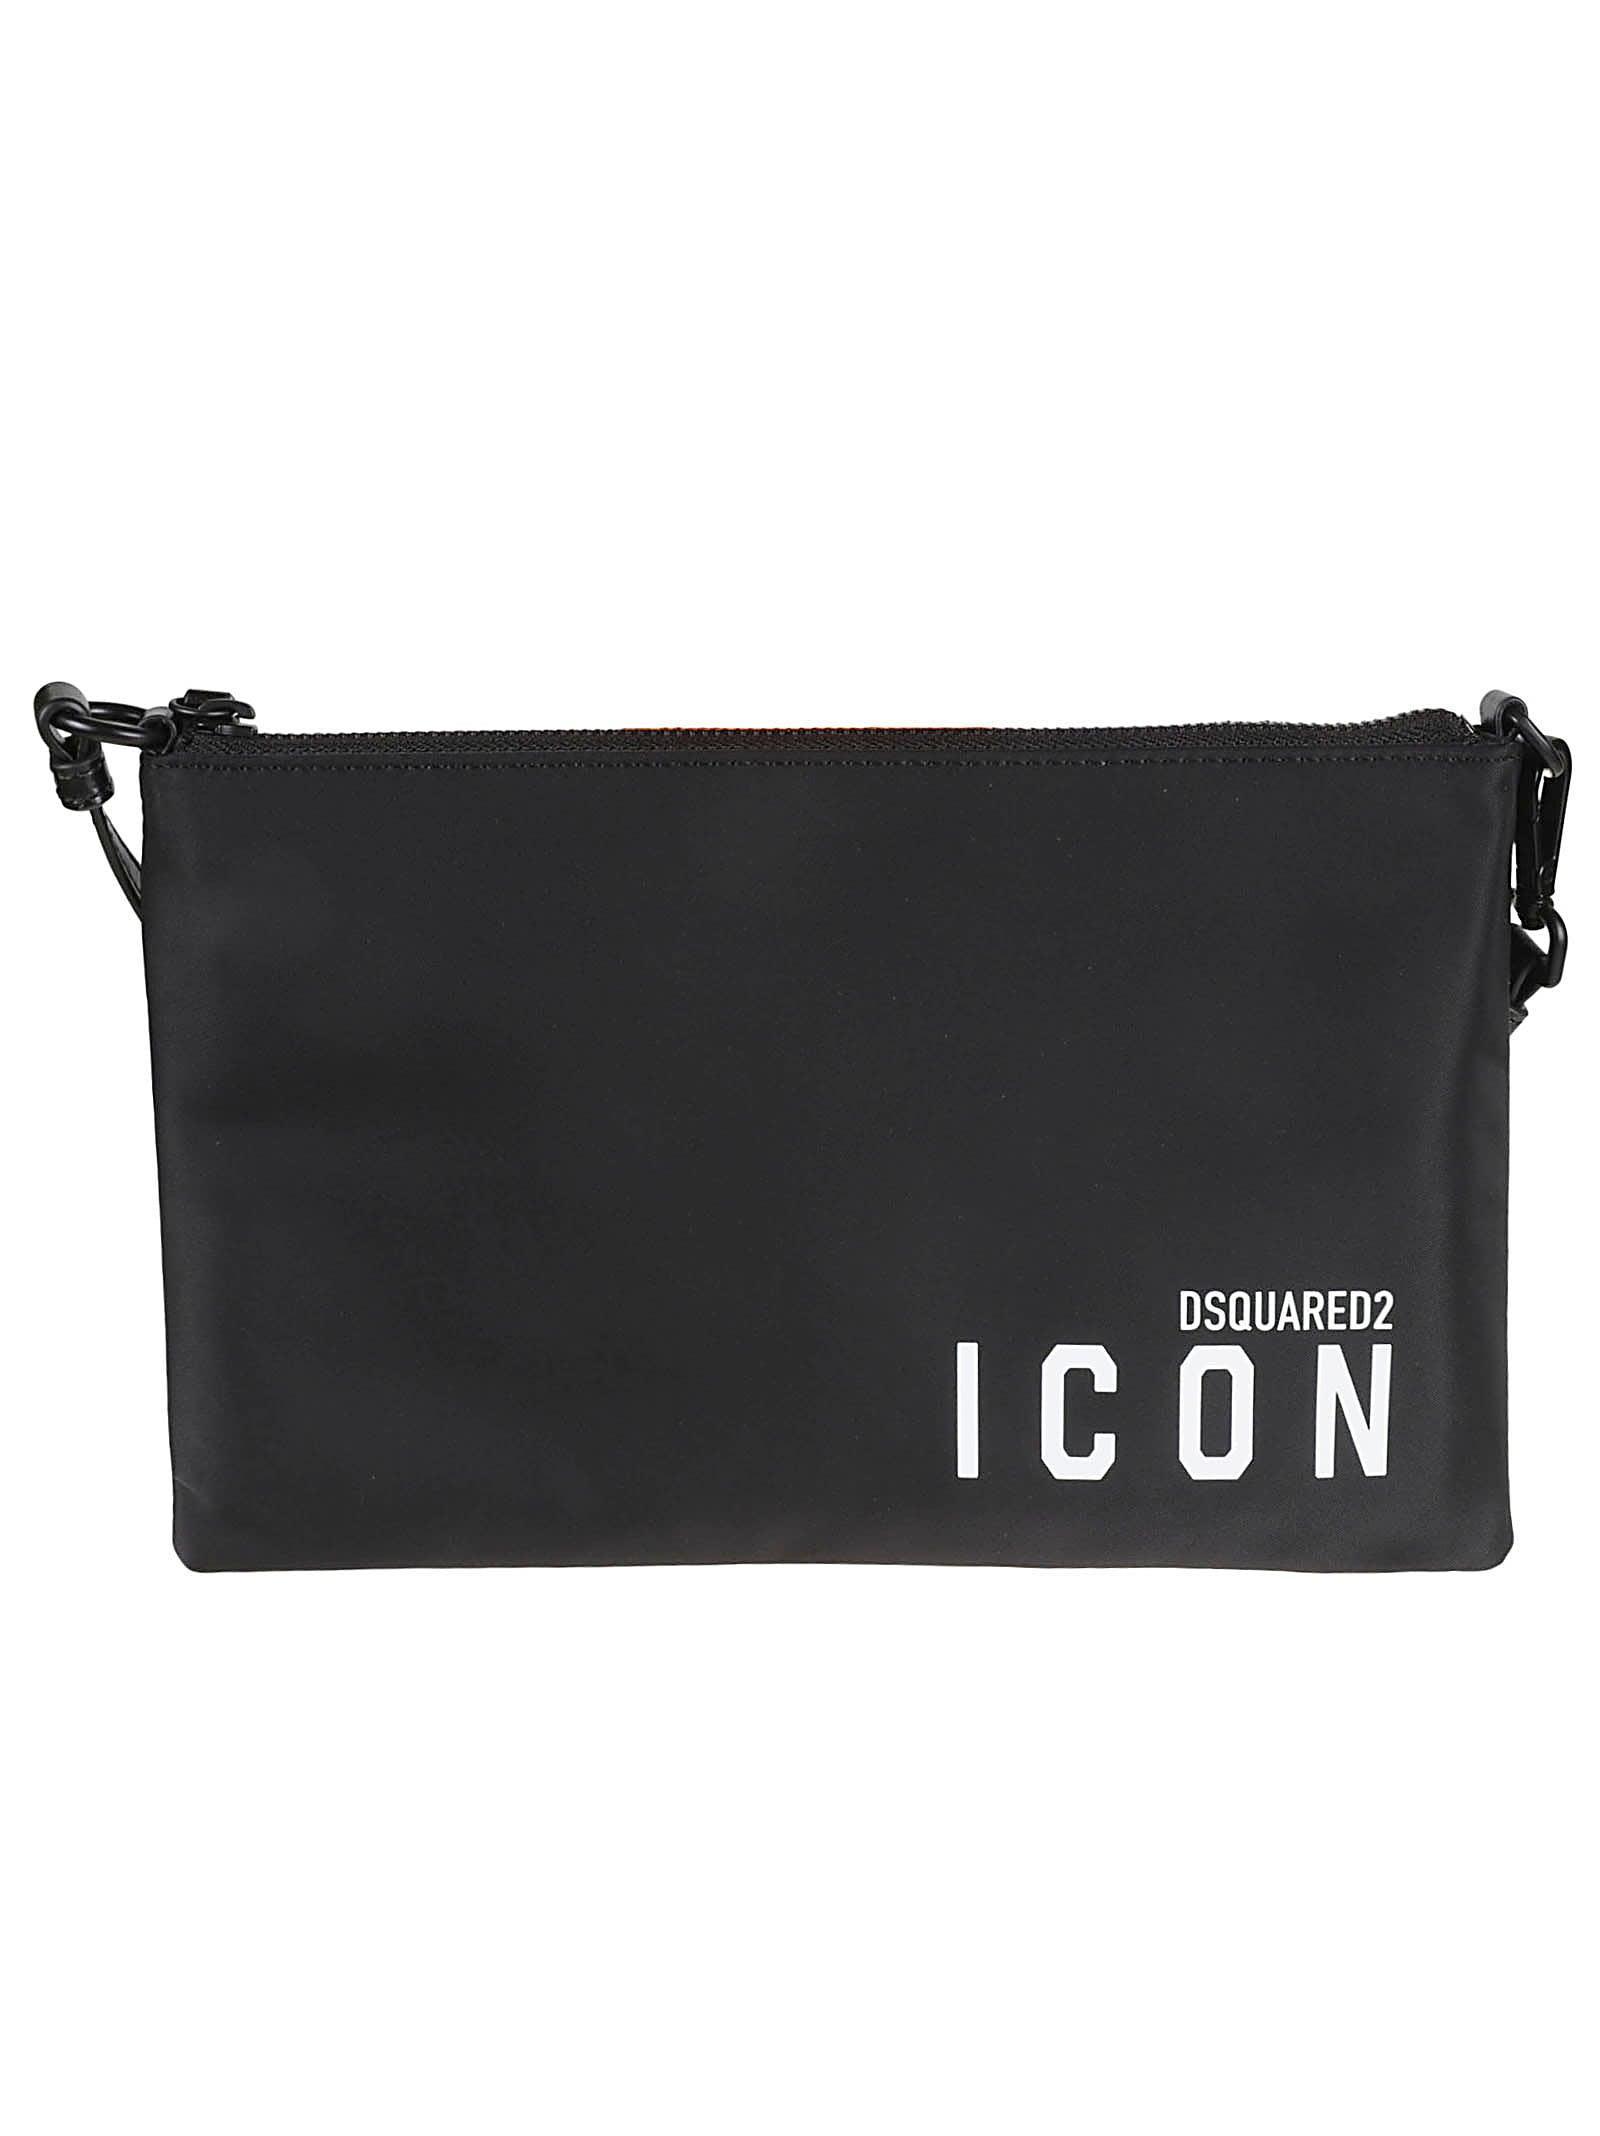 DSquared² Top Zip Icon Print Pouch in Black | Lyst